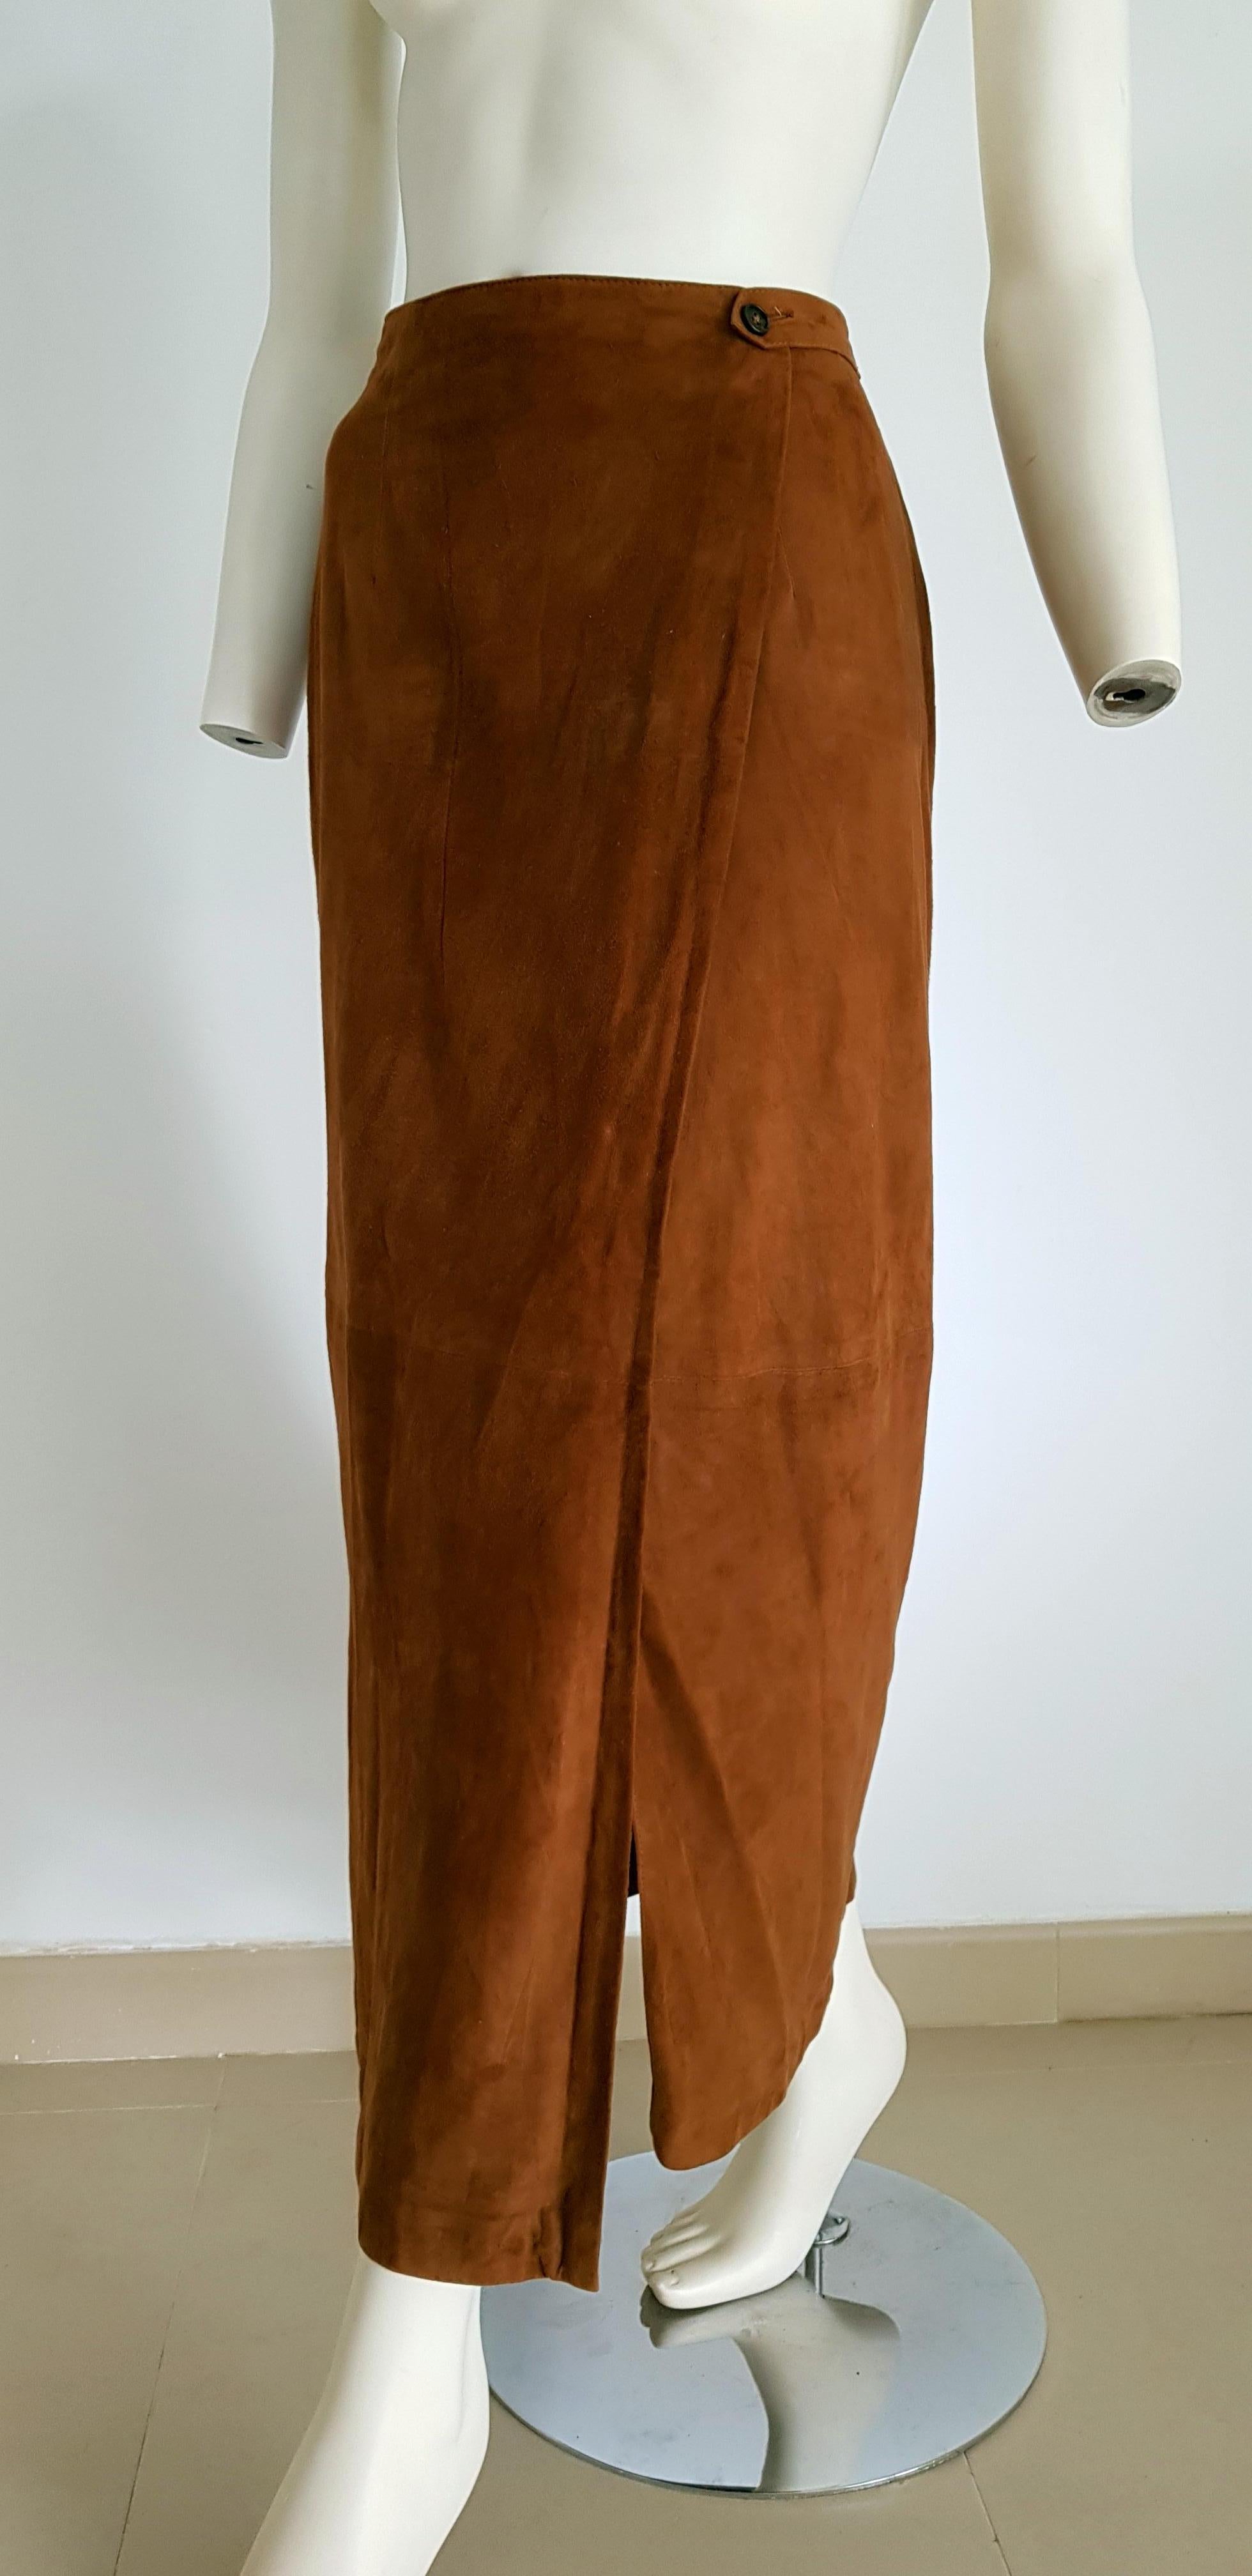 RALPH LAUREN brown suede silk lined long skirt - Unworn, New.

SIZE: equivalent to about Small / Medium, please review approx measurements as follows in cm: lenght 95, waist circumference 80, hip circumference 98.
TO CONVERT: cm x 0.39 =